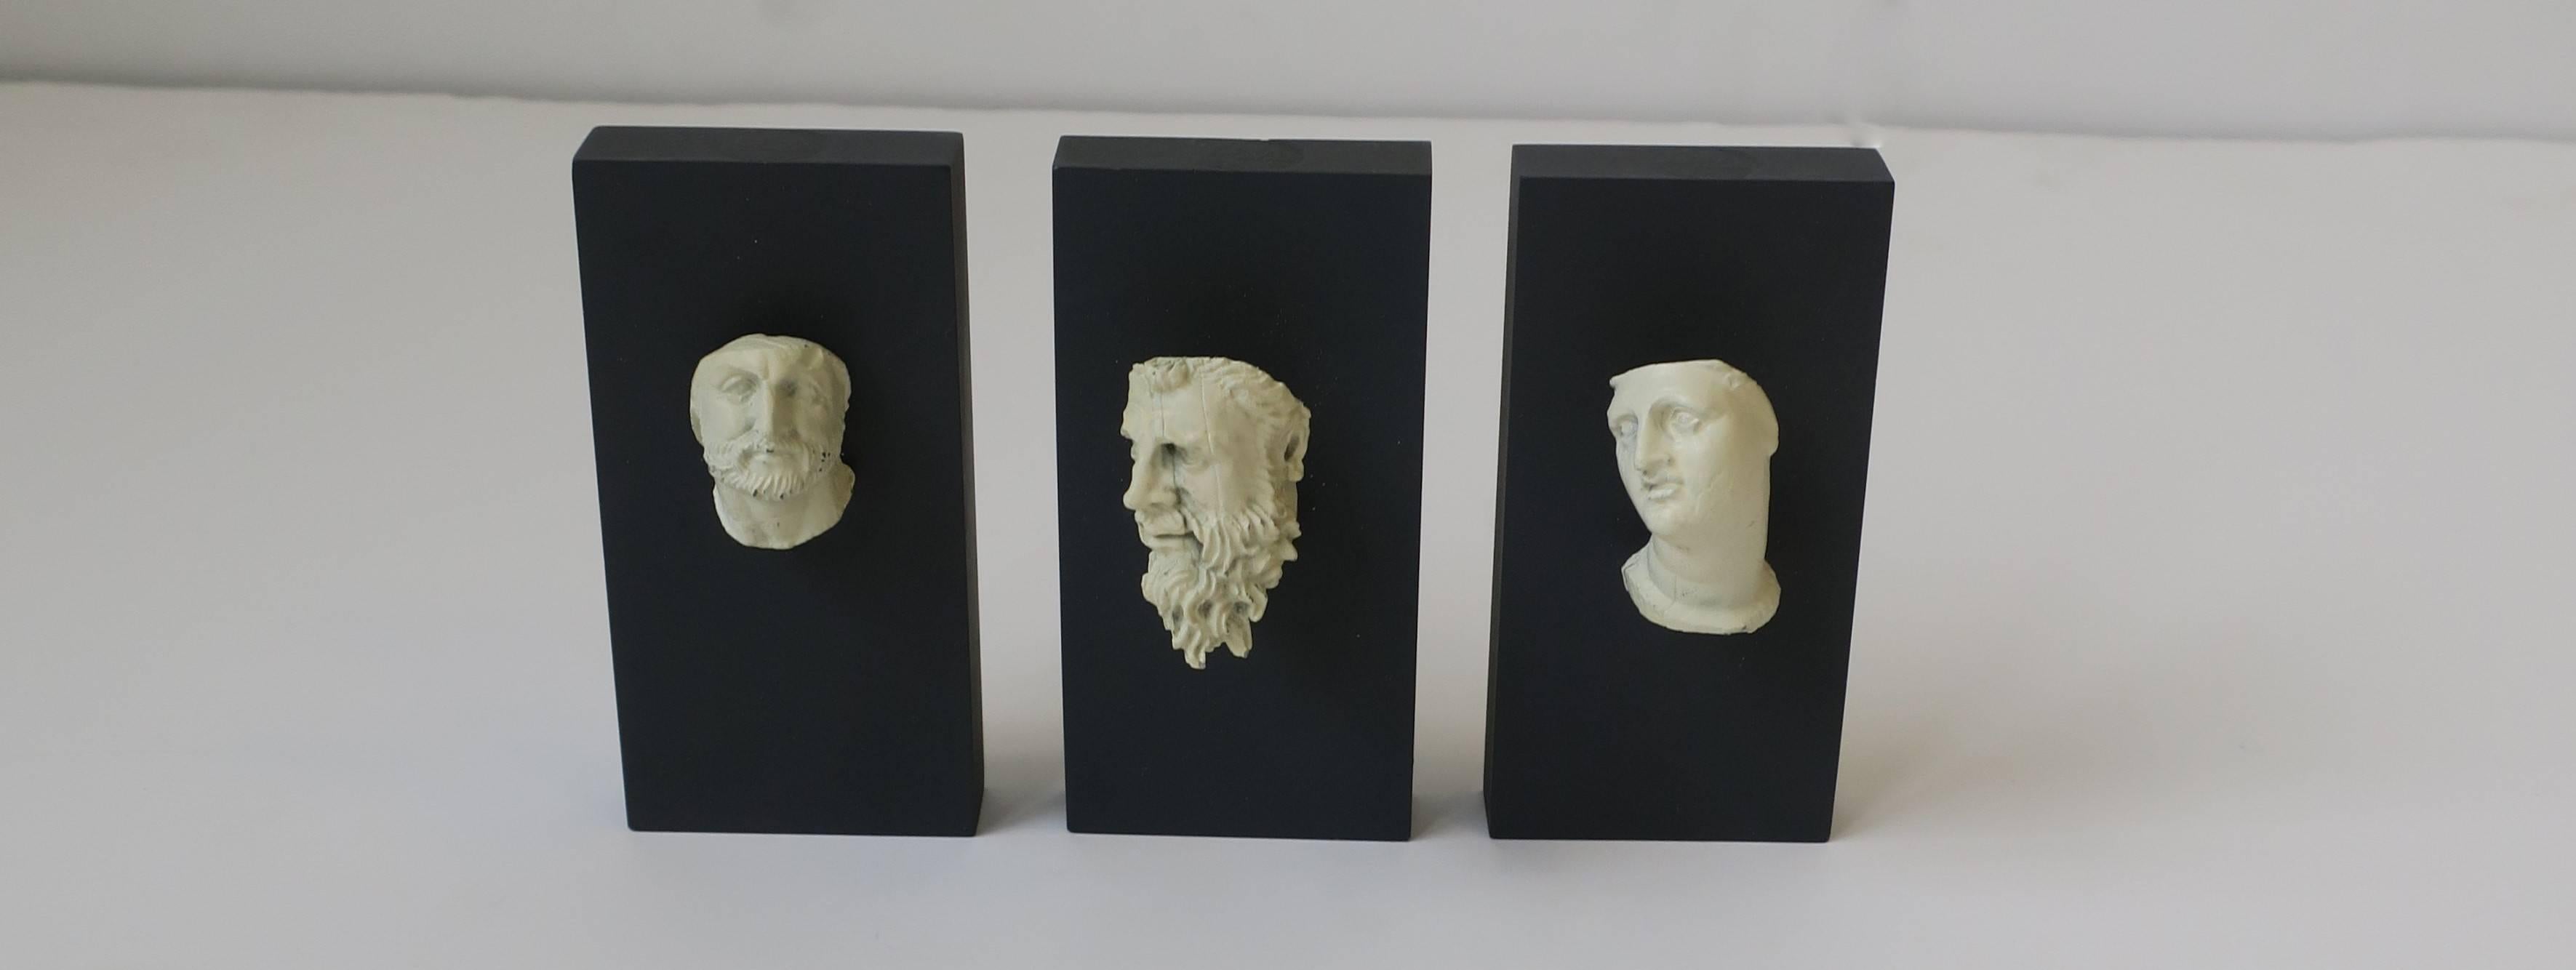 Set of 3 Available Here for $950

With a Minimalist feel, a chic three-piece set of mini Greek antiquity reproduction sculptures mounted to dark grey ceramic vertical bases. Description/history on back. 

Please note measurements: each measures 4